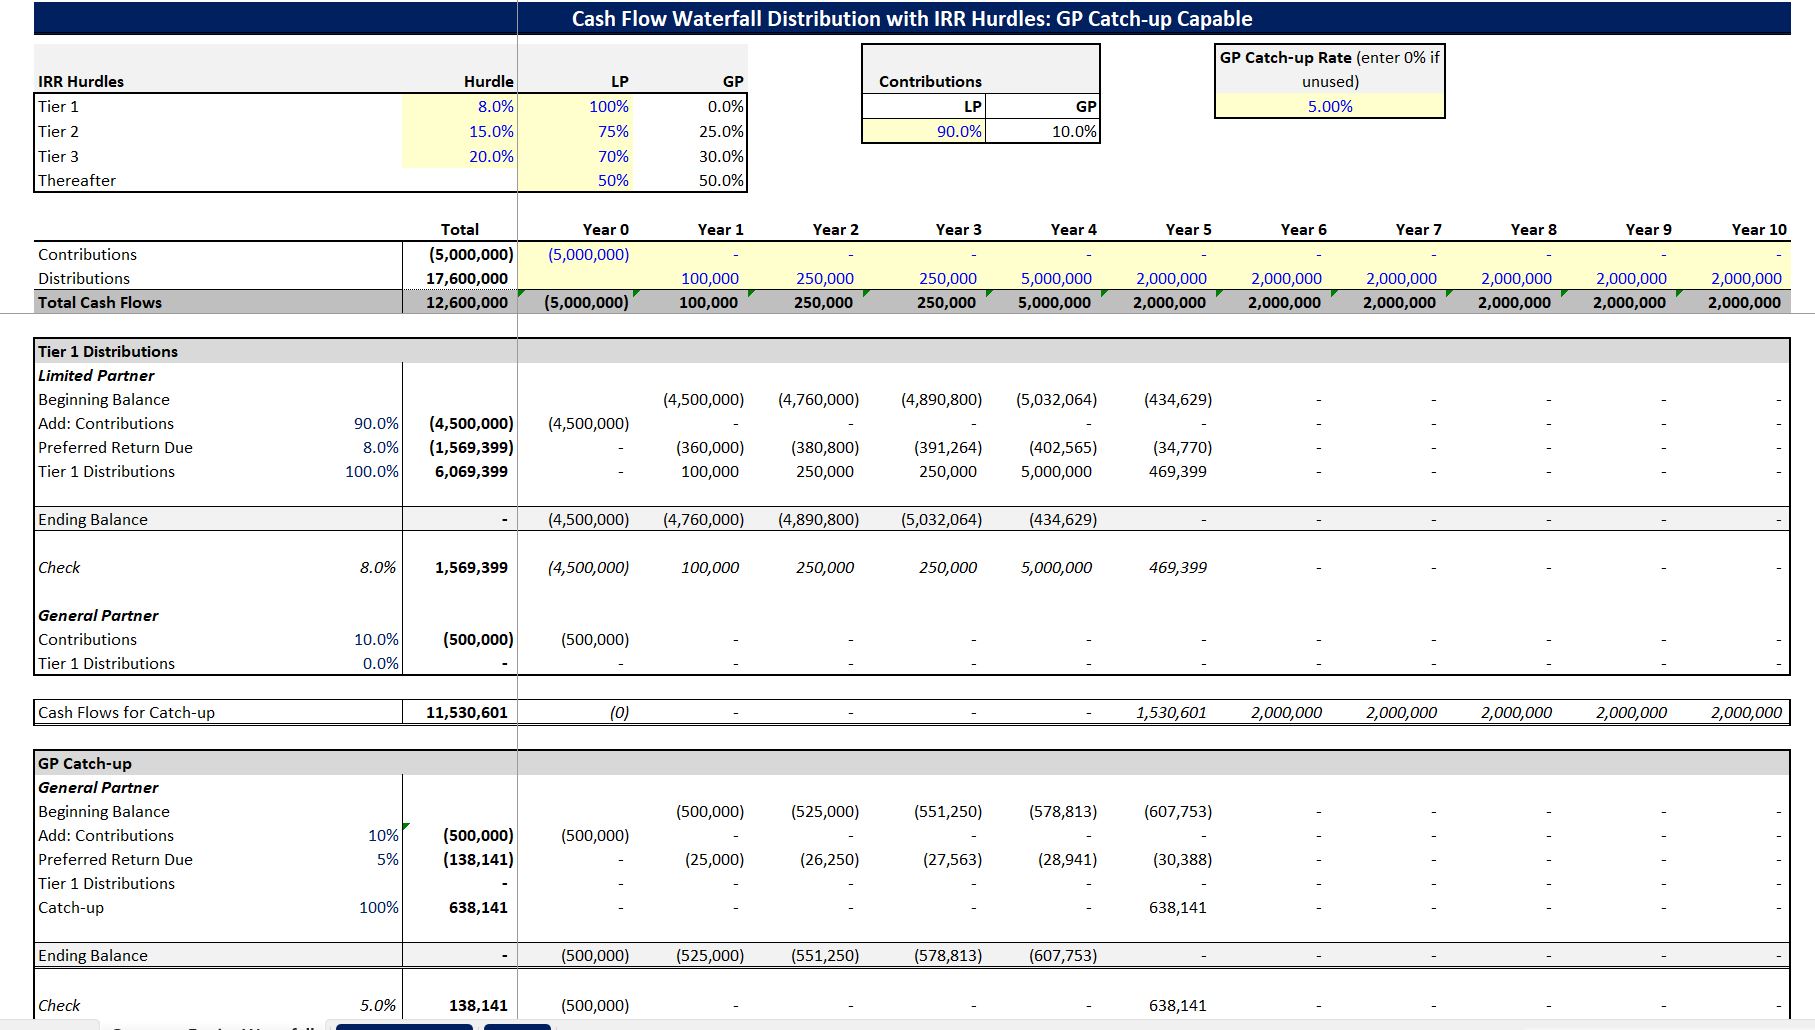 Joint Venture Waterfall: GP Catch-up Option (Excel template (XLSX)) Preview Image